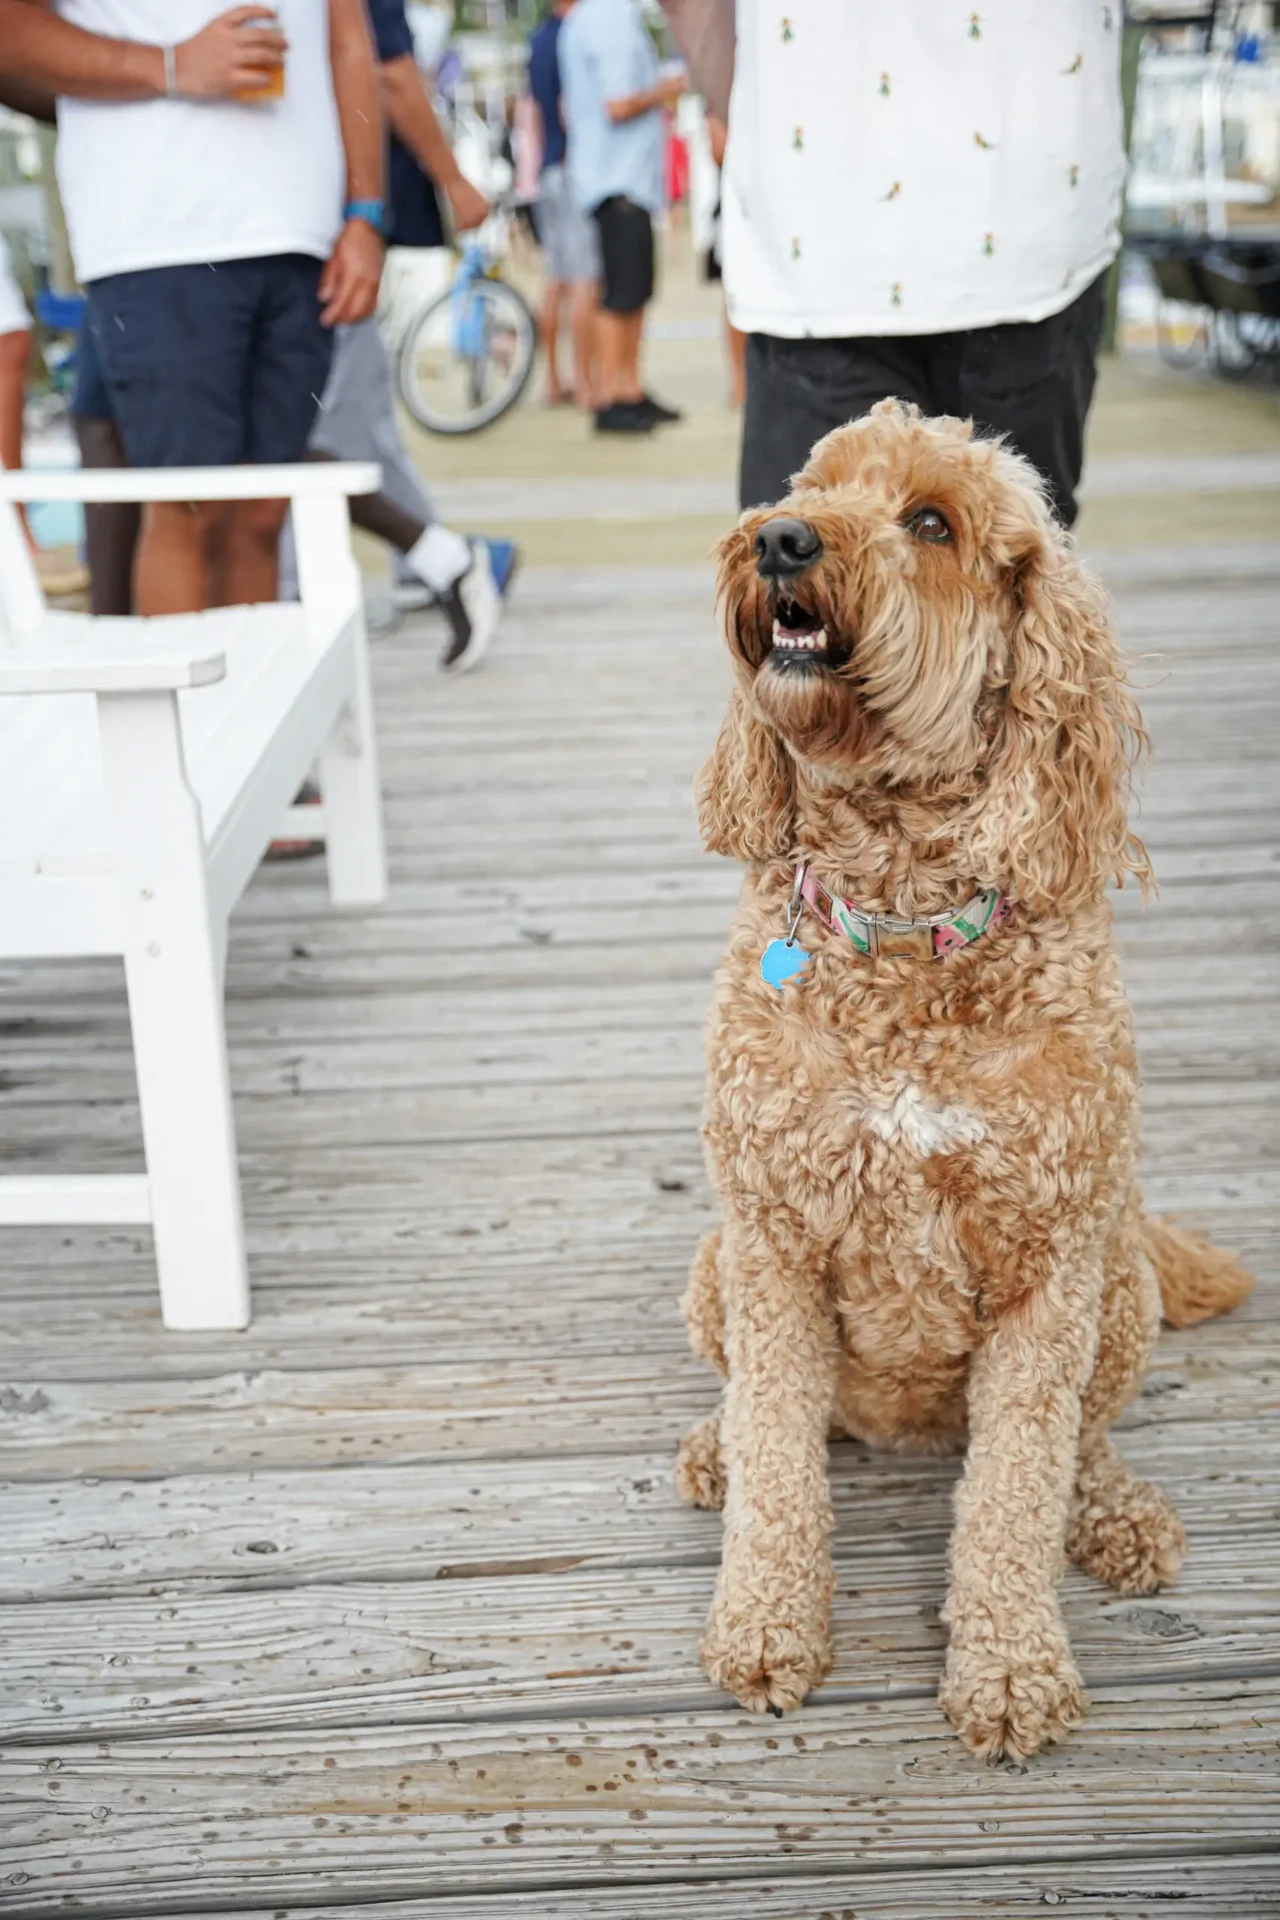 A brown dog of the rendezvous sitting on a wooden boardwalk with people in the background.